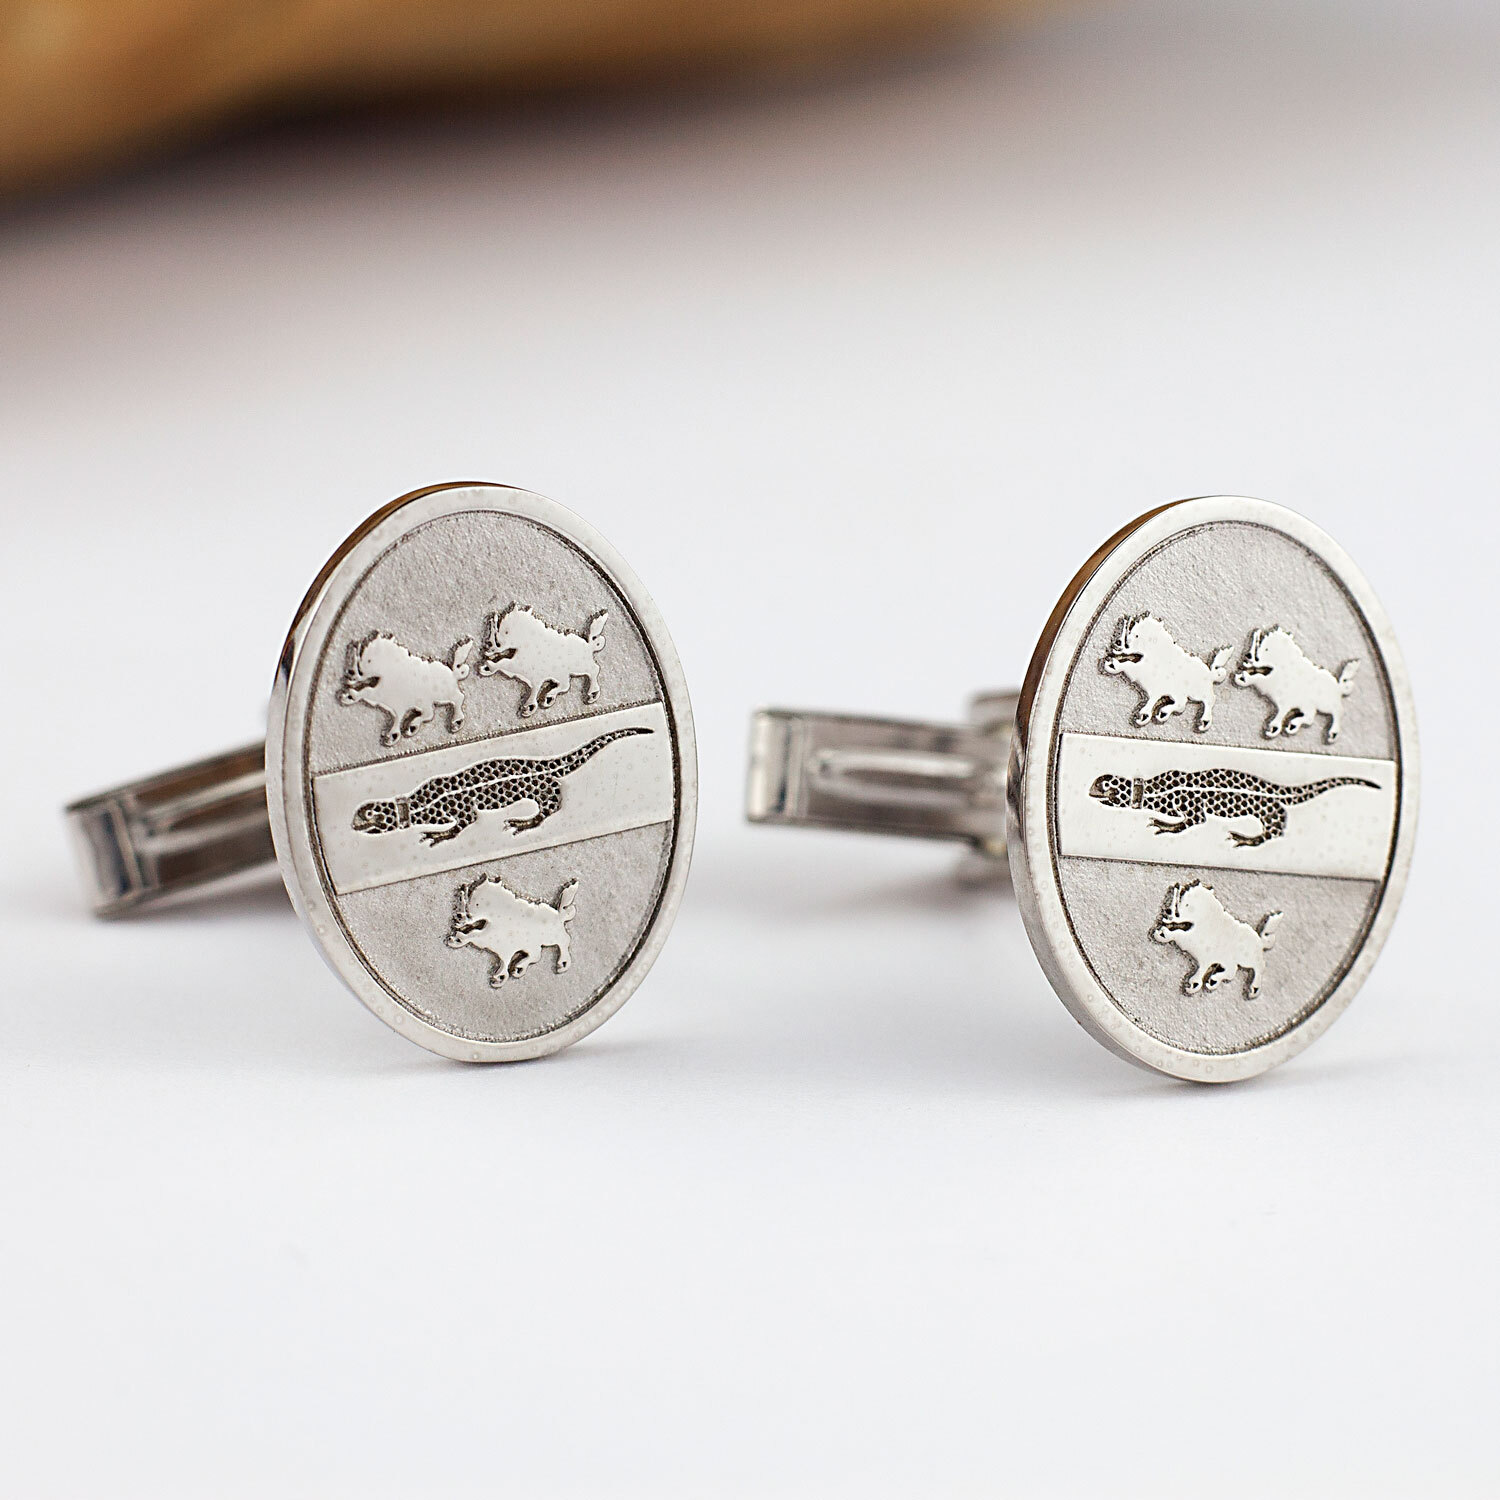 Select Gifts Phillips Ireland Heraldry Crest Sterling Silver Cufflinks Engraved Box